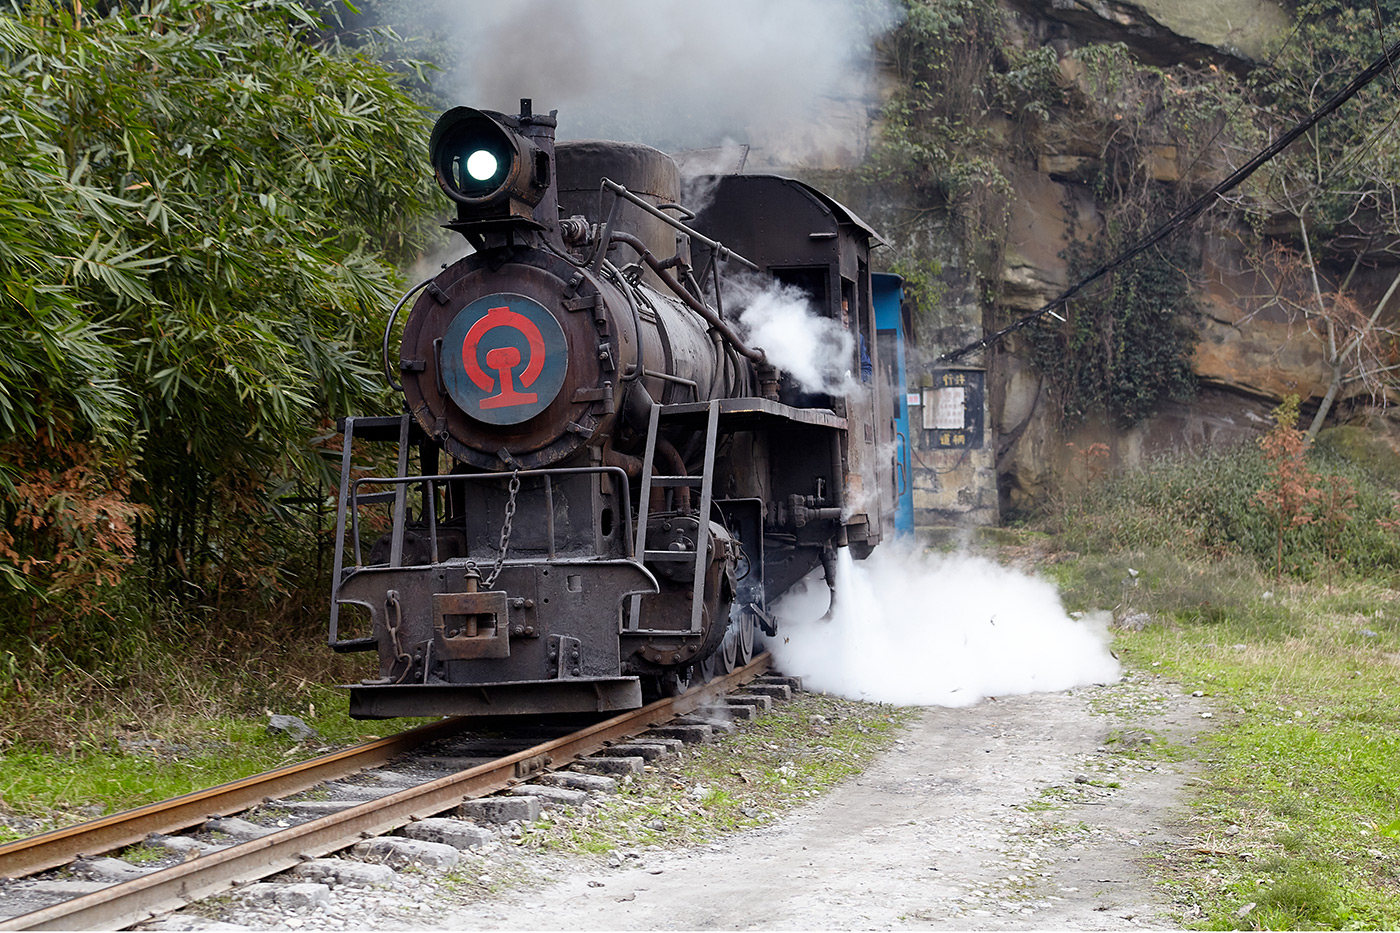 The fire carts of xishi Steam train